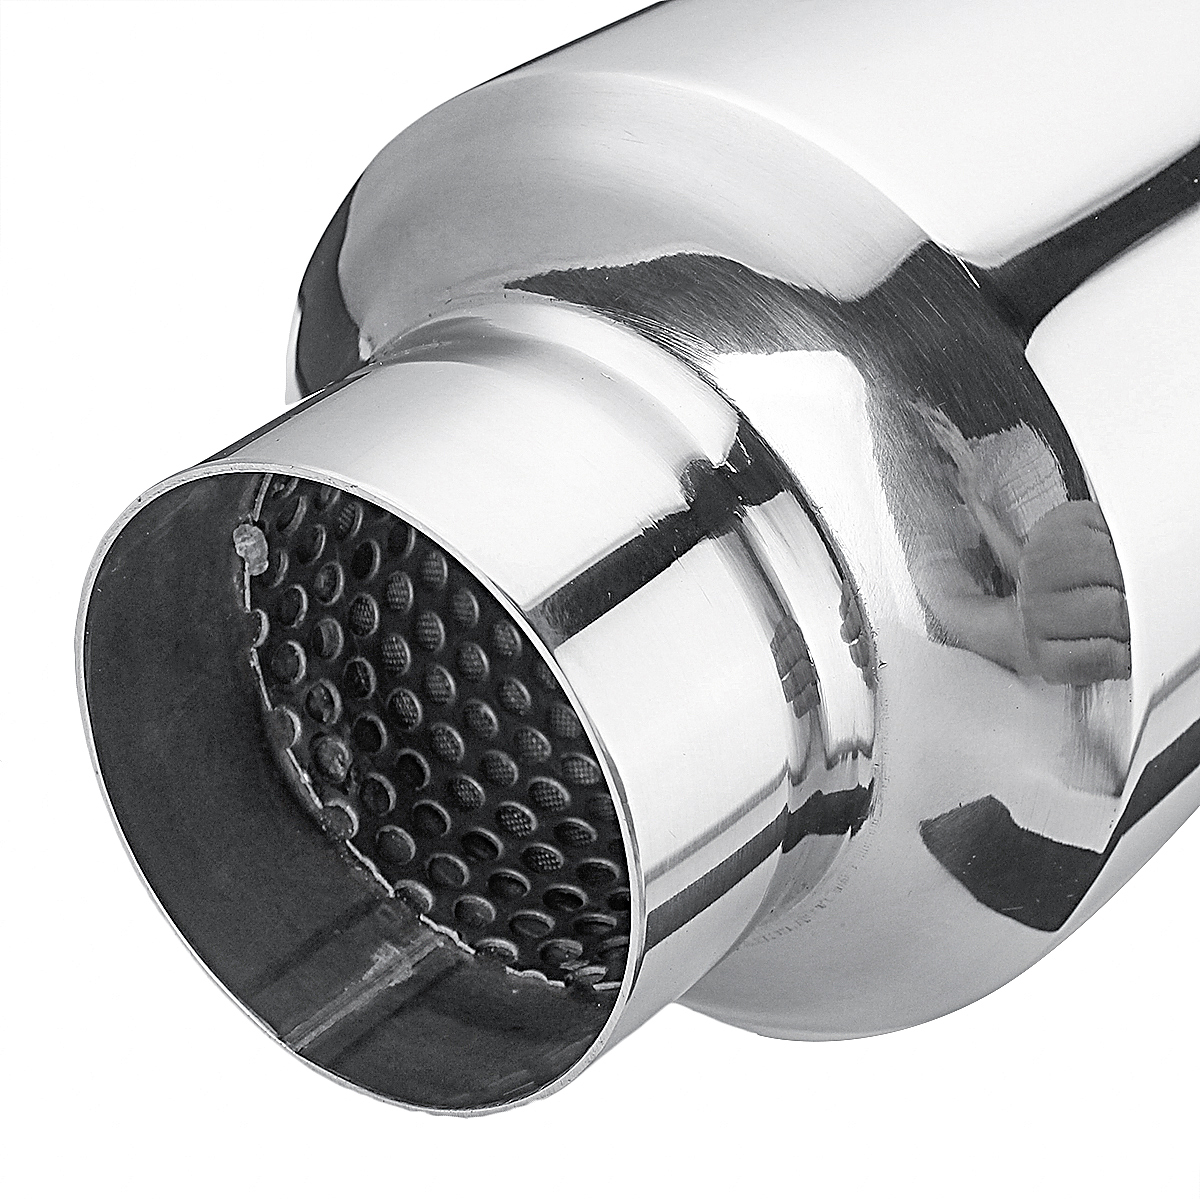 Universal Turbine Exhaust Muffler Resonator 304 Stainless Steel 2.5 Inch Inlet 2.5 Inch Outlet